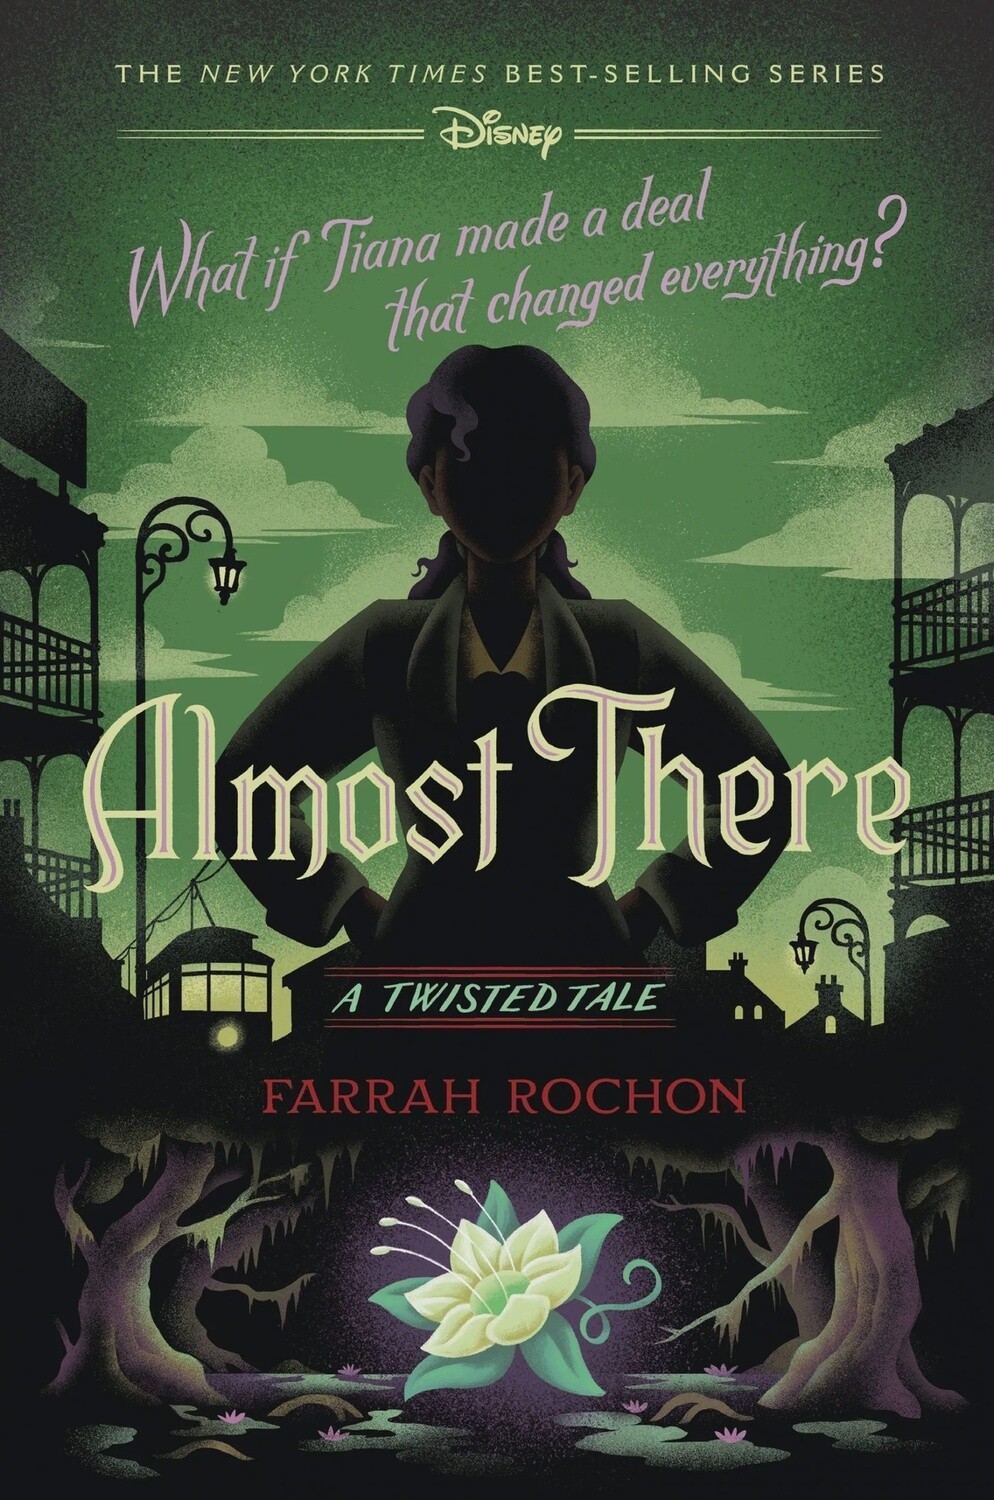 Almost There (A Twisted Tale)